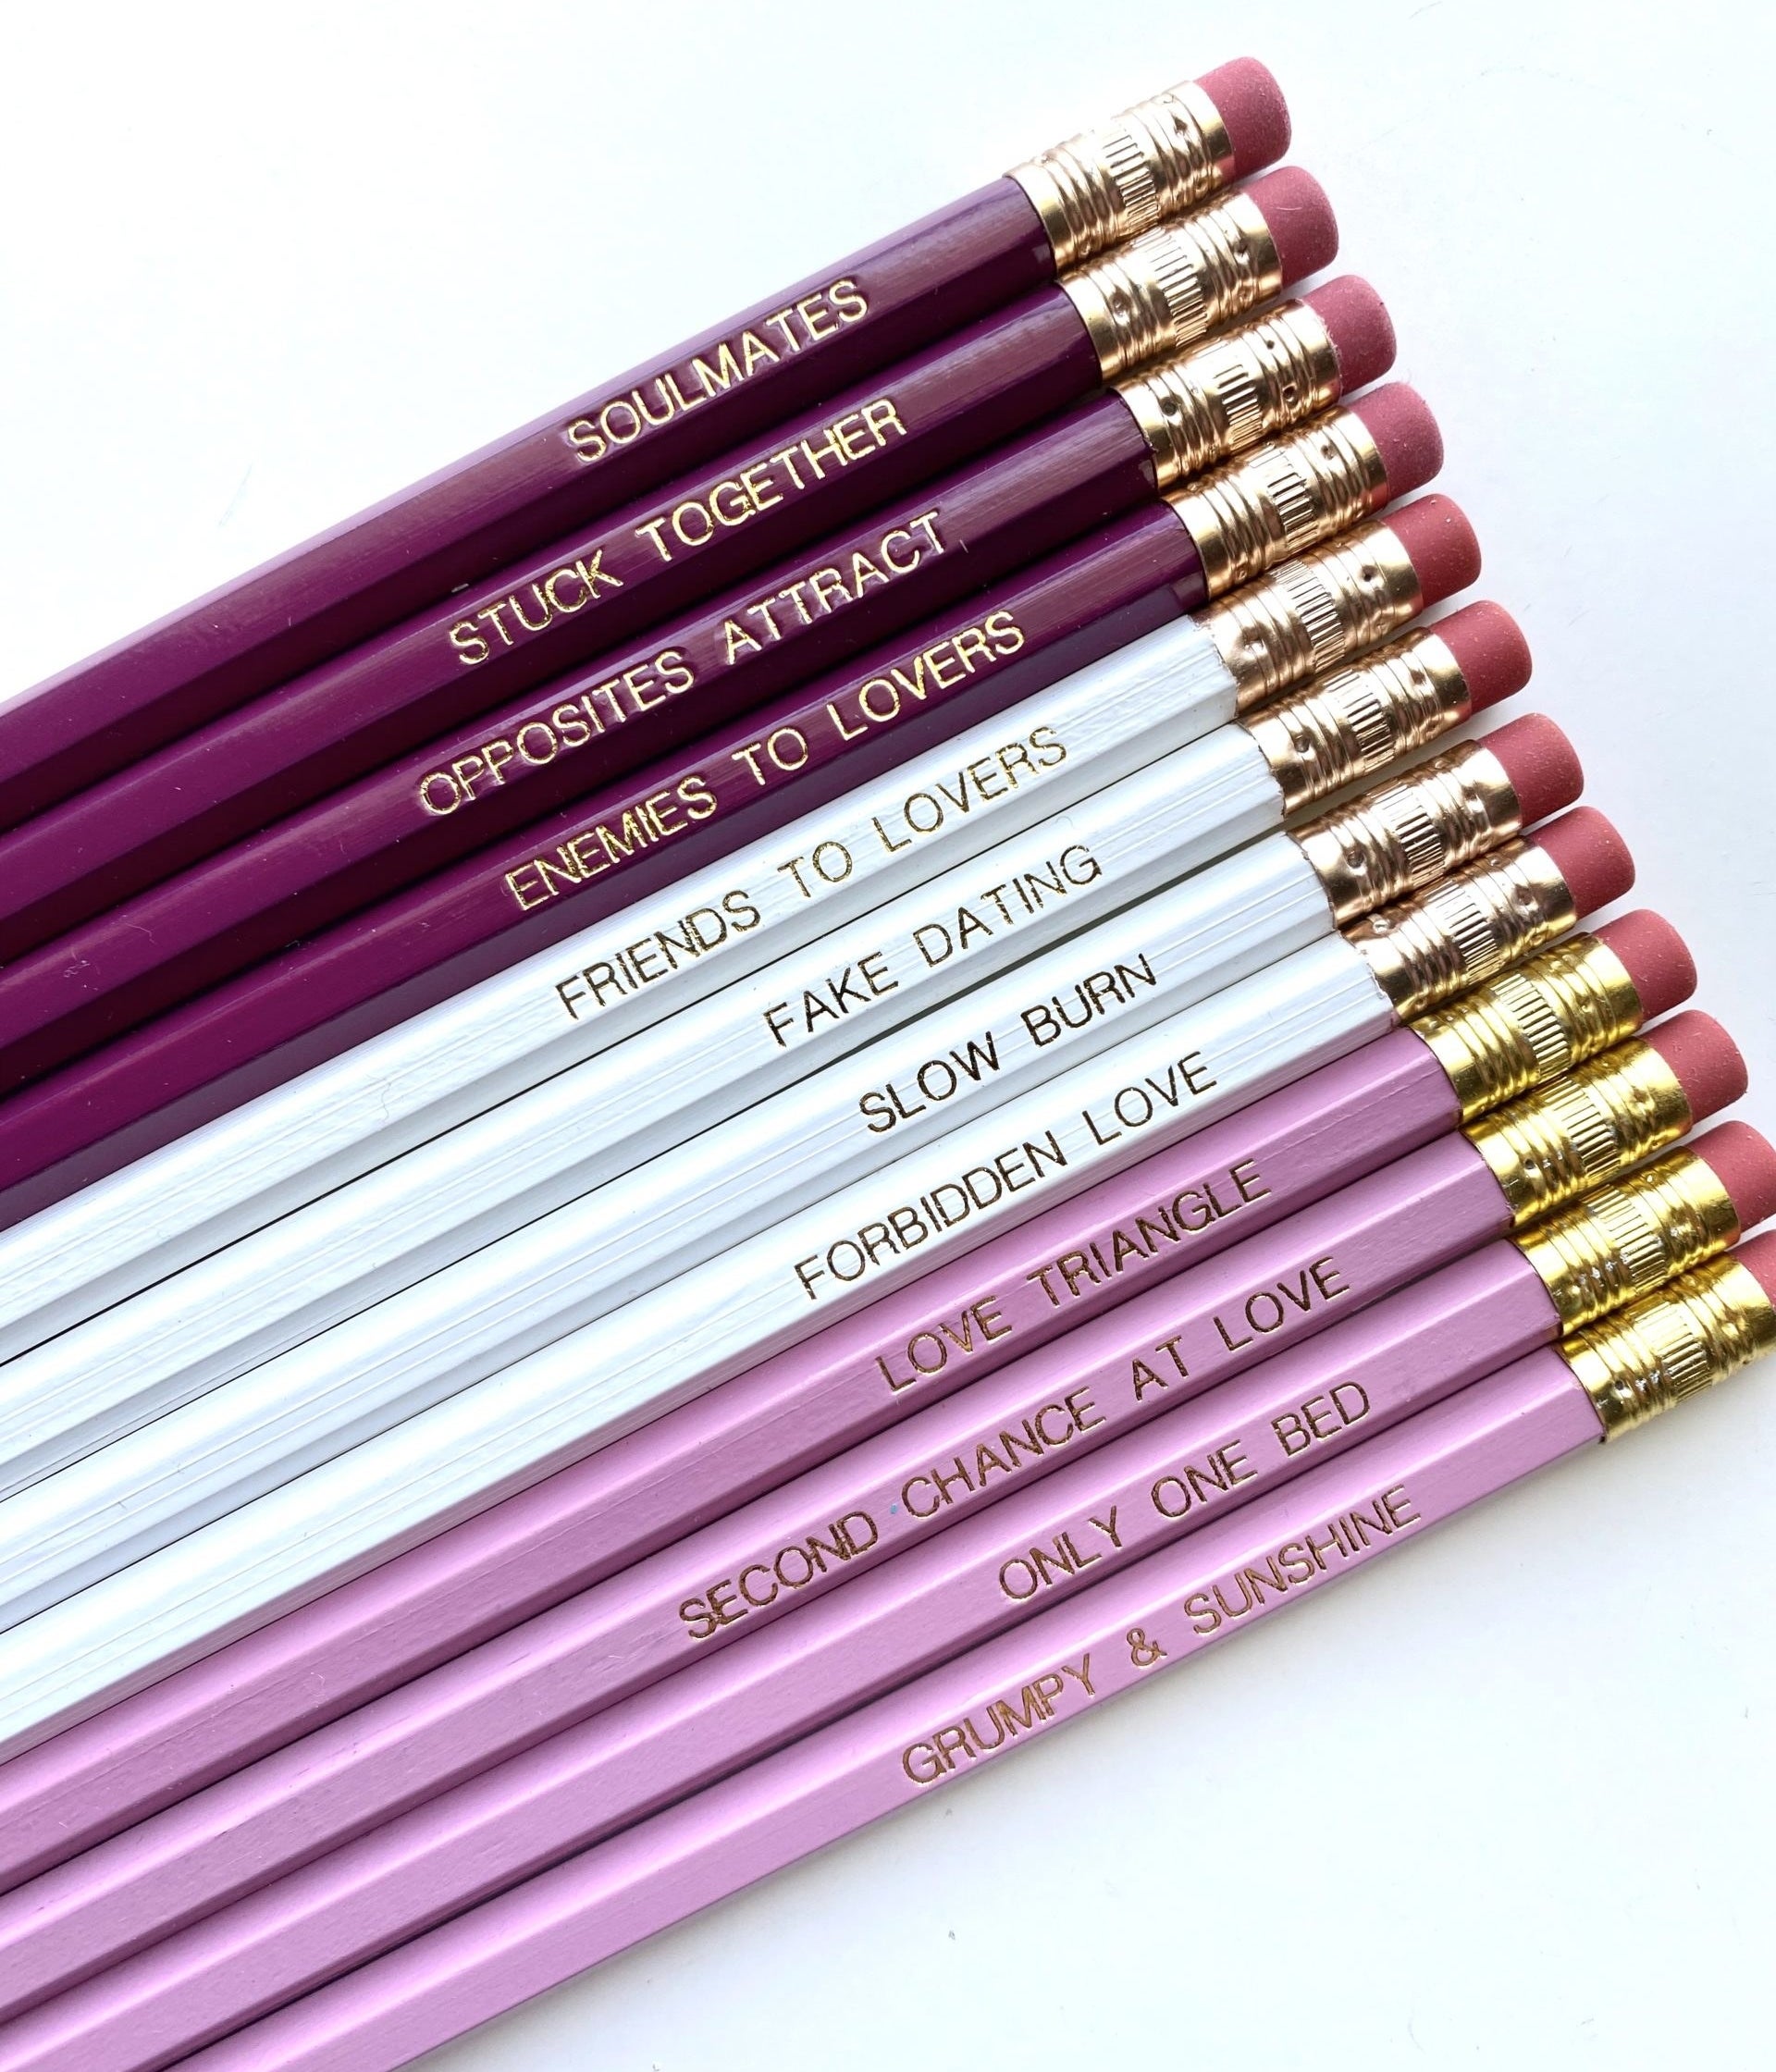 The pink, purple, and white pencils printed with: soulmates, stuck together, opposites attract, enemies to lovers, friends to lovers, fake dating, slow burn, forbidden love, love triangle, second chance at love, only one bed, and grumpy &amp;amp; sunshine